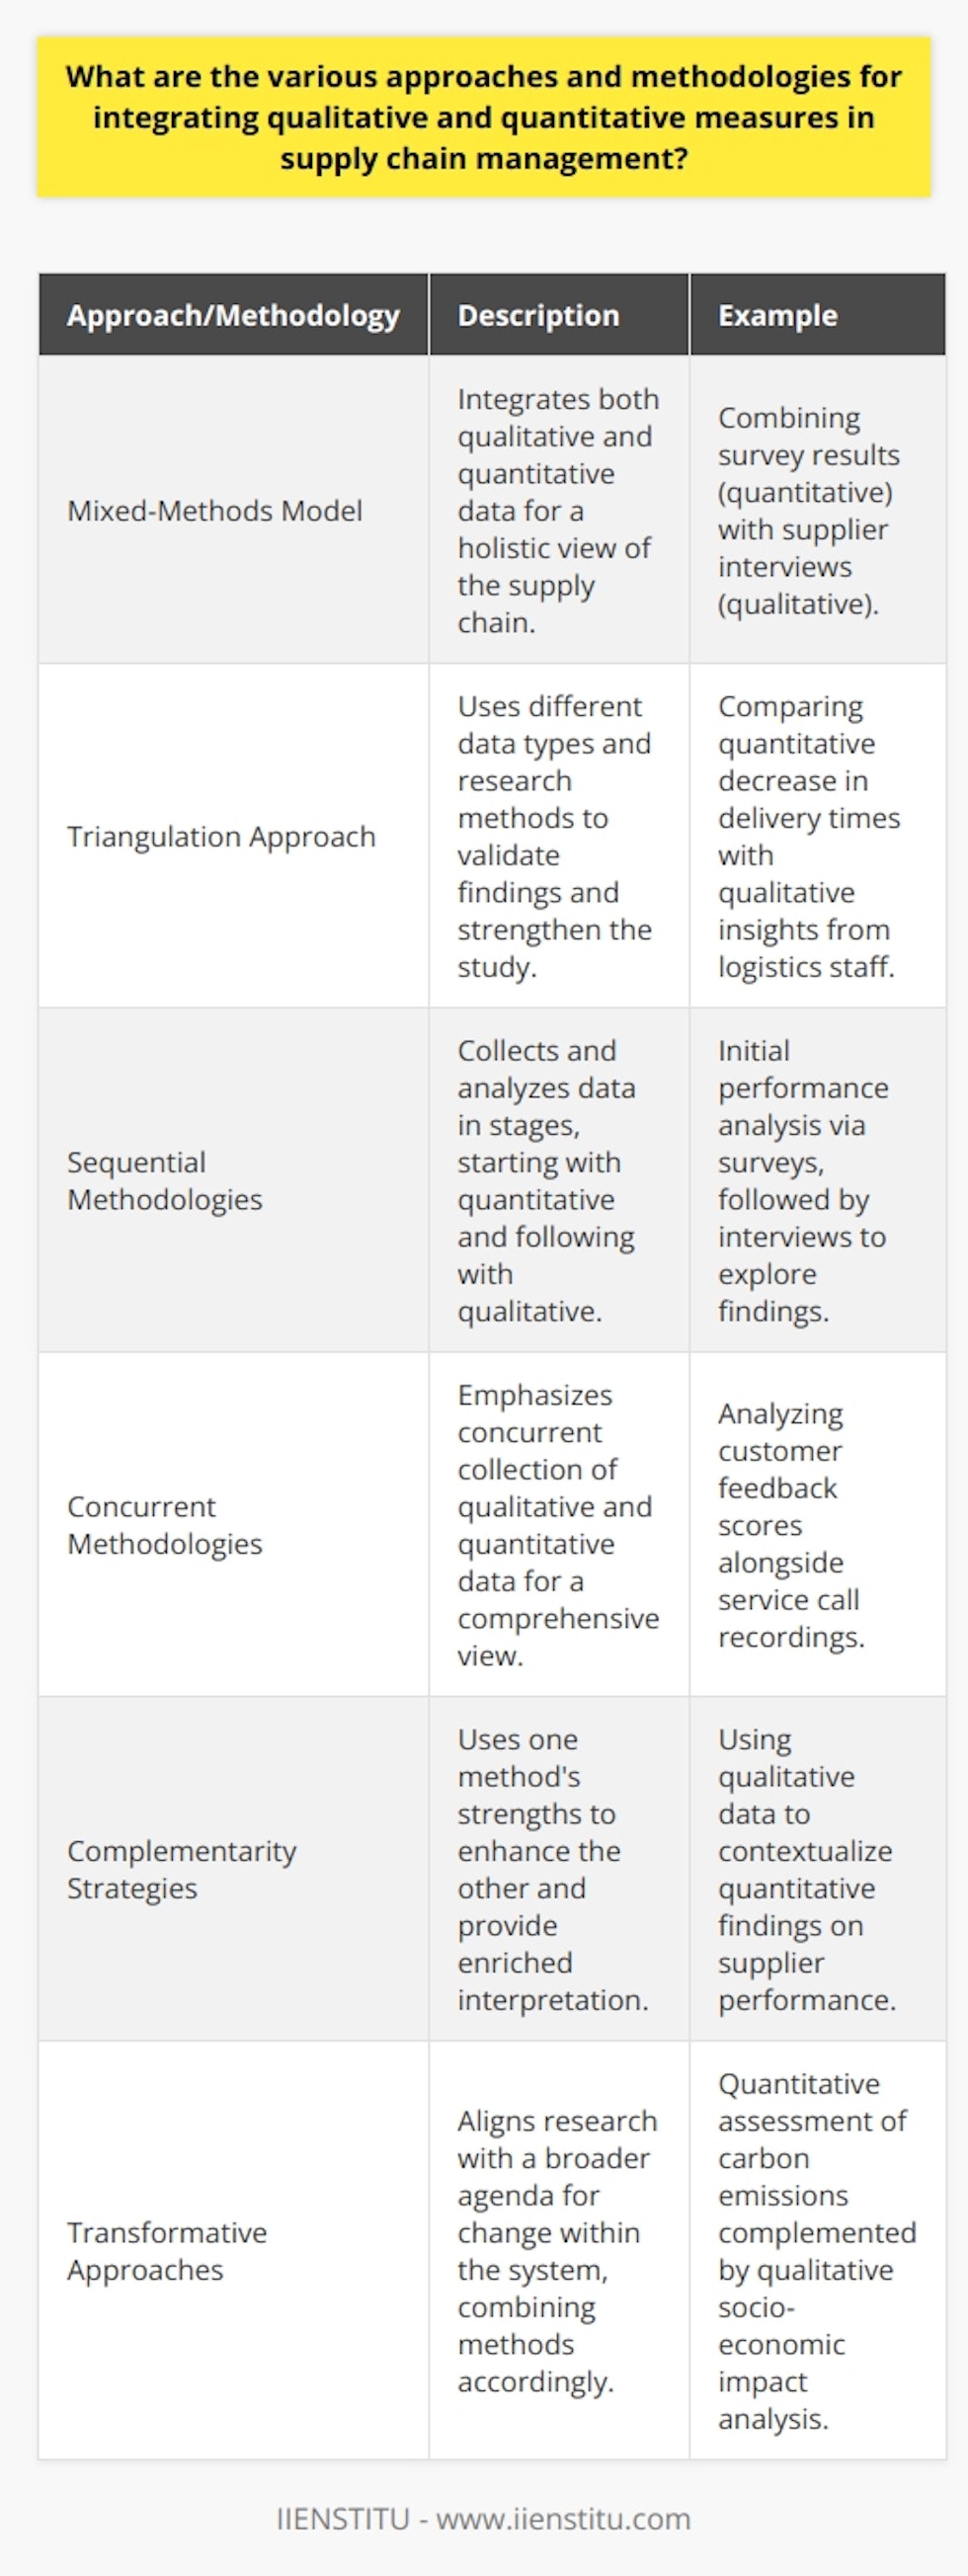 Integrating qualitative and quantitative measures in supply chain management allows for a holistic view of operations, critical in making informed decisions and establishing improvements. One approach is using a Mixed-Methods model, where both qualitative and quantitative data play vital roles. Within this framework, methodologies vary depending on the research objectives and the intricacies of the supply chain being studied.Triangulation ApproachTriangulation is instrumental in overcoming the limitations of a single-method approach by combining different types of data and research methods. It can strengthen a study's validity by cross-verifying information. For instance, quantitative data might show a decrease in delivery times, while qualitative data from interviews with logistics personnel could provide insights into the strategies that led to this improvement.Sequential MethodologiesIn sequential methodologies, the primary focus is on the order in which data is gathered and analyzed. Initially, quantitative data may be collected via surveys or operational metrics to assess performance levels and identify areas of concern. Following this, qualitative methods such as interviews or focus groups can delve deeper into the underlying reasons for the trends or issues identified. This staged approach helps create a narrative around the numbers, providing more in-depth understanding.Concurrent MethodologiesWhen employing concurrent methodologies, the emphasis is on the simultaneous collection of both qualitative and quantitative data. It provides a well-rounded picture at any given point in time. For example, while analyzing customer feedback scores (quantitative), supply chain managers might concurrently analyze customer service call recordings (qualitative) to understand the nuances behind customer satisfaction or dissatisfaction more comprehensively.Complementarity StrategiesComplementarity strategies use the strengths of one method to enhance or inform the other. Qualitative data can give context to and thus enrich the interpretation of quantitative data, while quantitative analysis can bring a level of precision to qualitative insights. In supply chain contexts, quantitative data might show which suppliers are performing poorly in terms of delivery times, with qualitative data used to explore why and how these issues can be resolved.Transformative ApproachesTransformative approaches prioritize the goal of research and align the use of qualitative and quantitative methods to a broader agenda, such as examining the supply chain's social or environmental impact. These approaches are built upon philosophical stances that advocate for change and betterment within the system. For example, a study may use quantitative measures to assess carbon emissions in the supply chain, while qualitative methods assess stakeholder perspectives and the socio-economic impacts of reducing emissions.Using these varied methodologies within supply chain management enables a deeper, data-rich engagement with complex problems, leading to more effective strategic planning and implementation. The IIENSTITU, as part of its commitment to providing comprehensive educational experiences, may include such integrative methodological approaches in its courses and research to ensure its students and stakeholders are well-versed in the art and science of supply chain management.